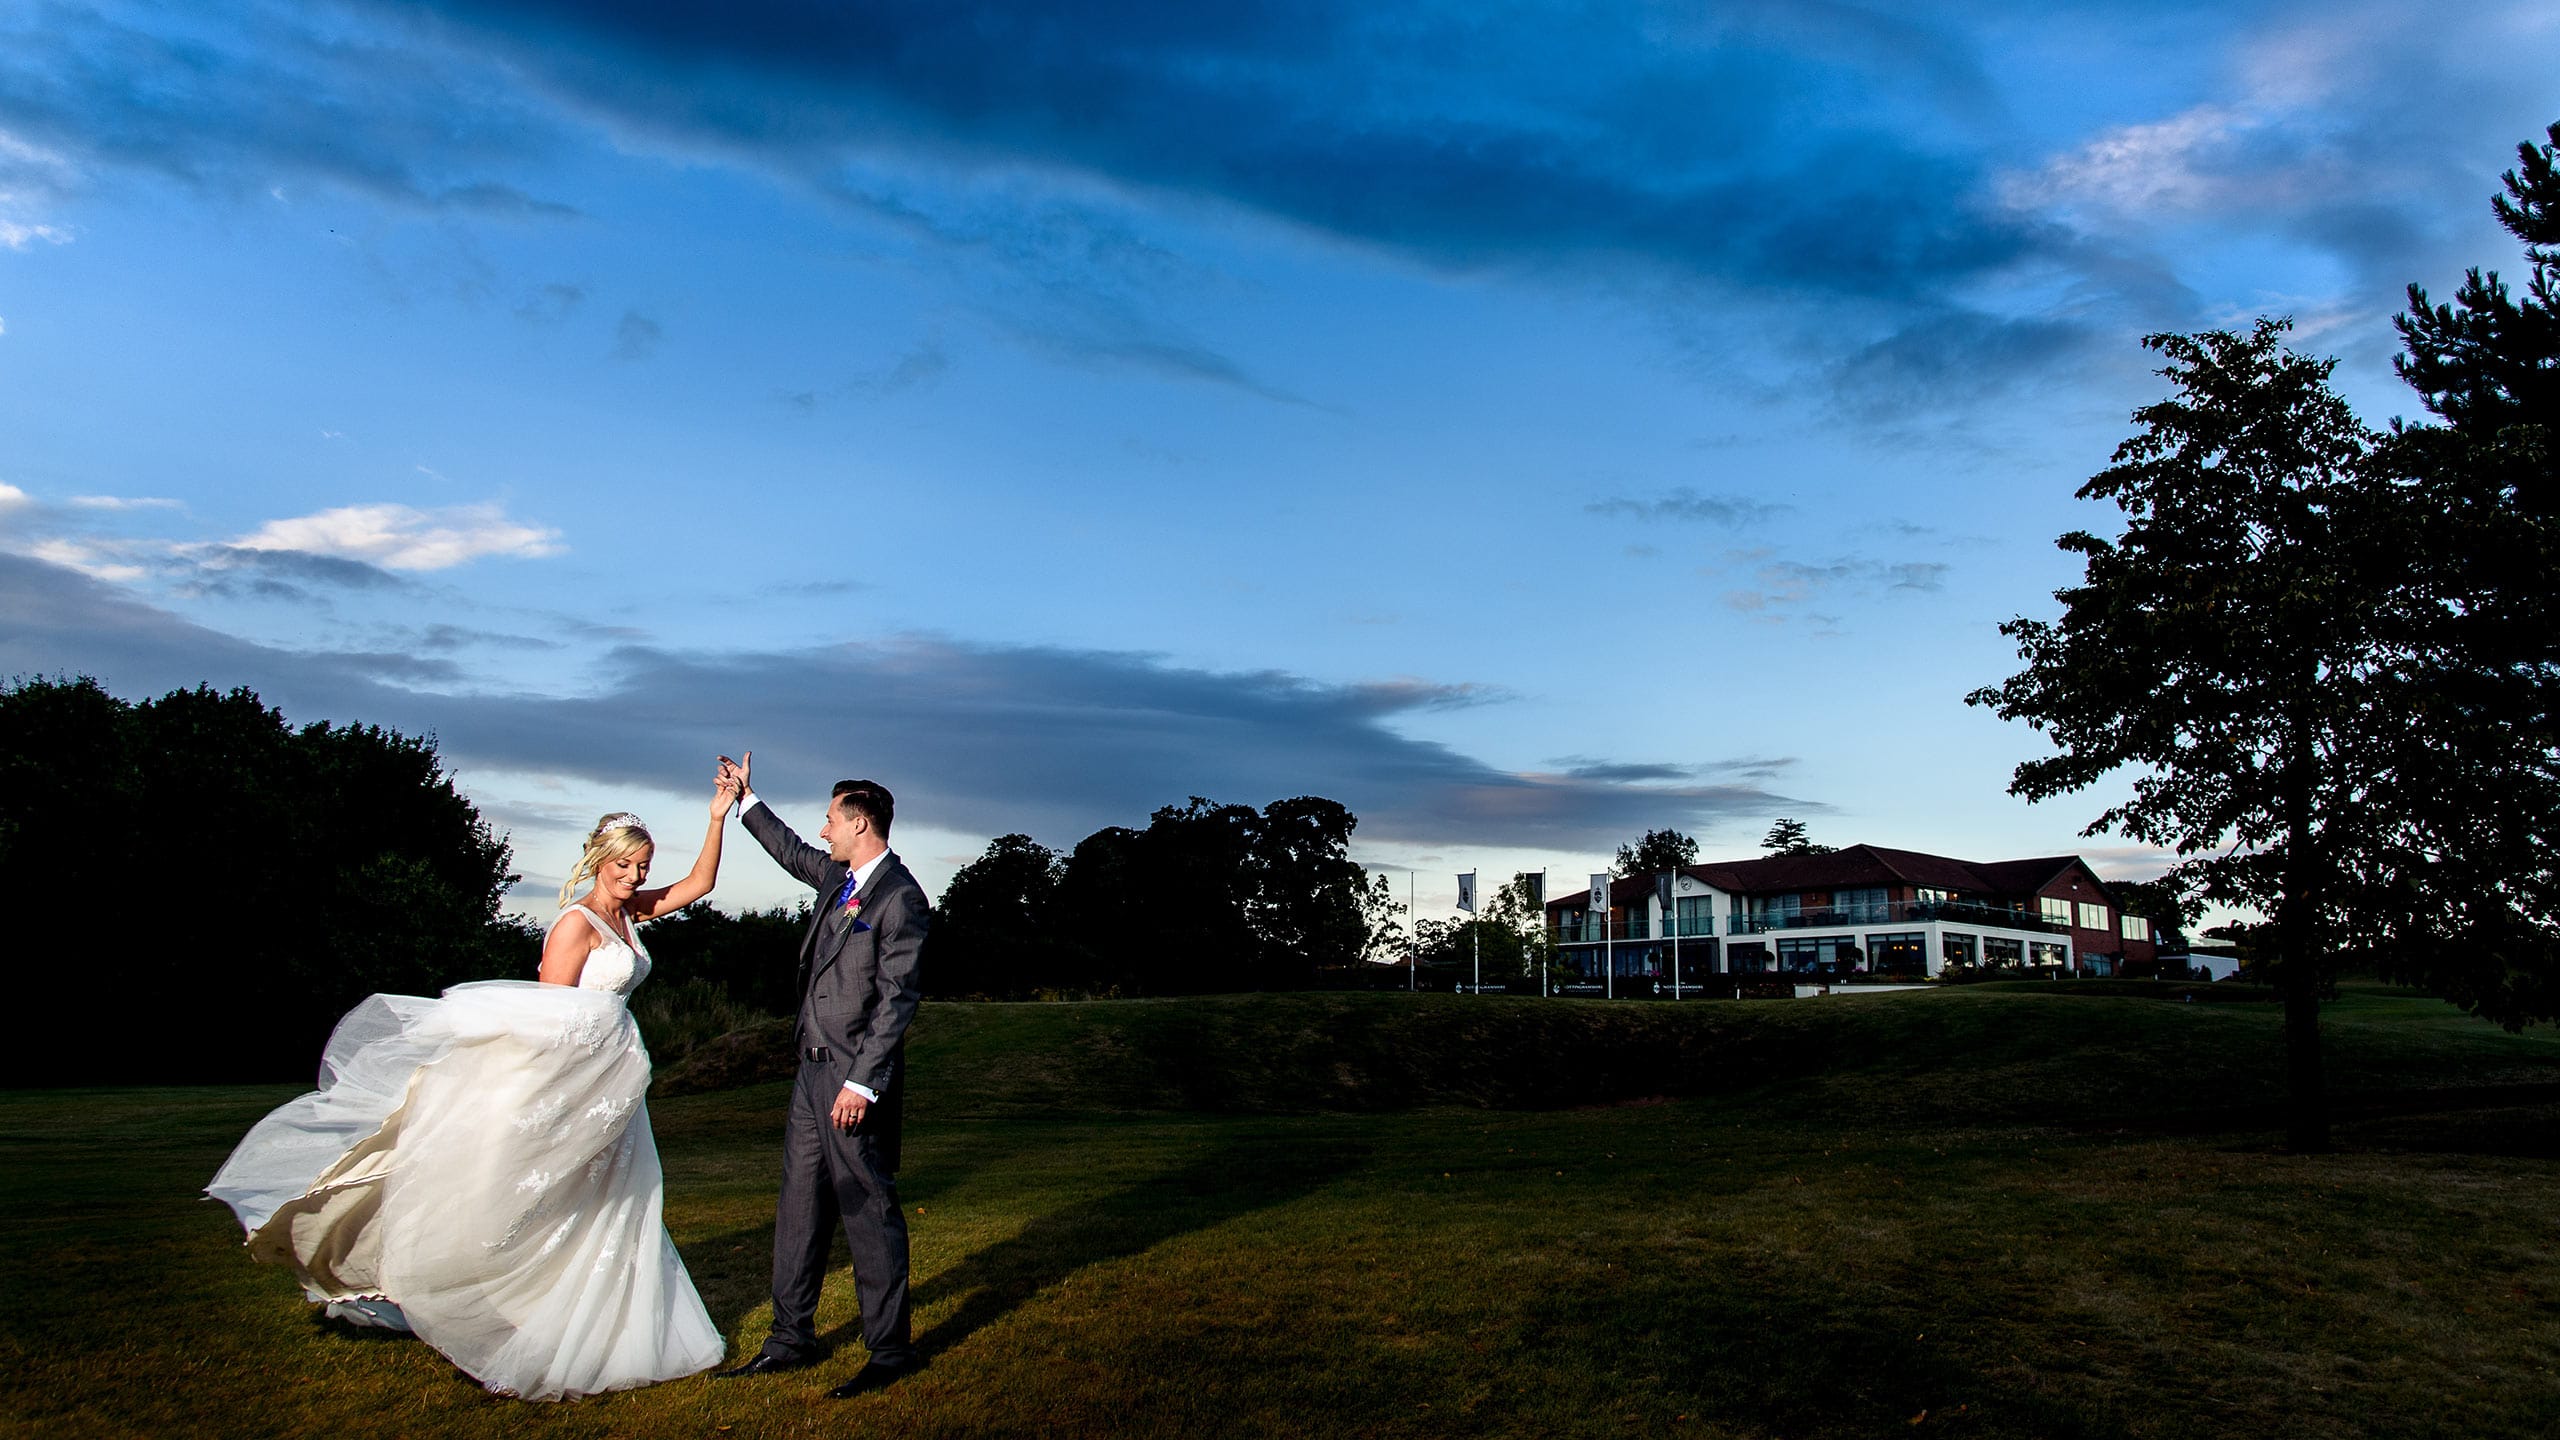 Bride & groom wedding photo at The Nottinghamshire Golf & Country Club